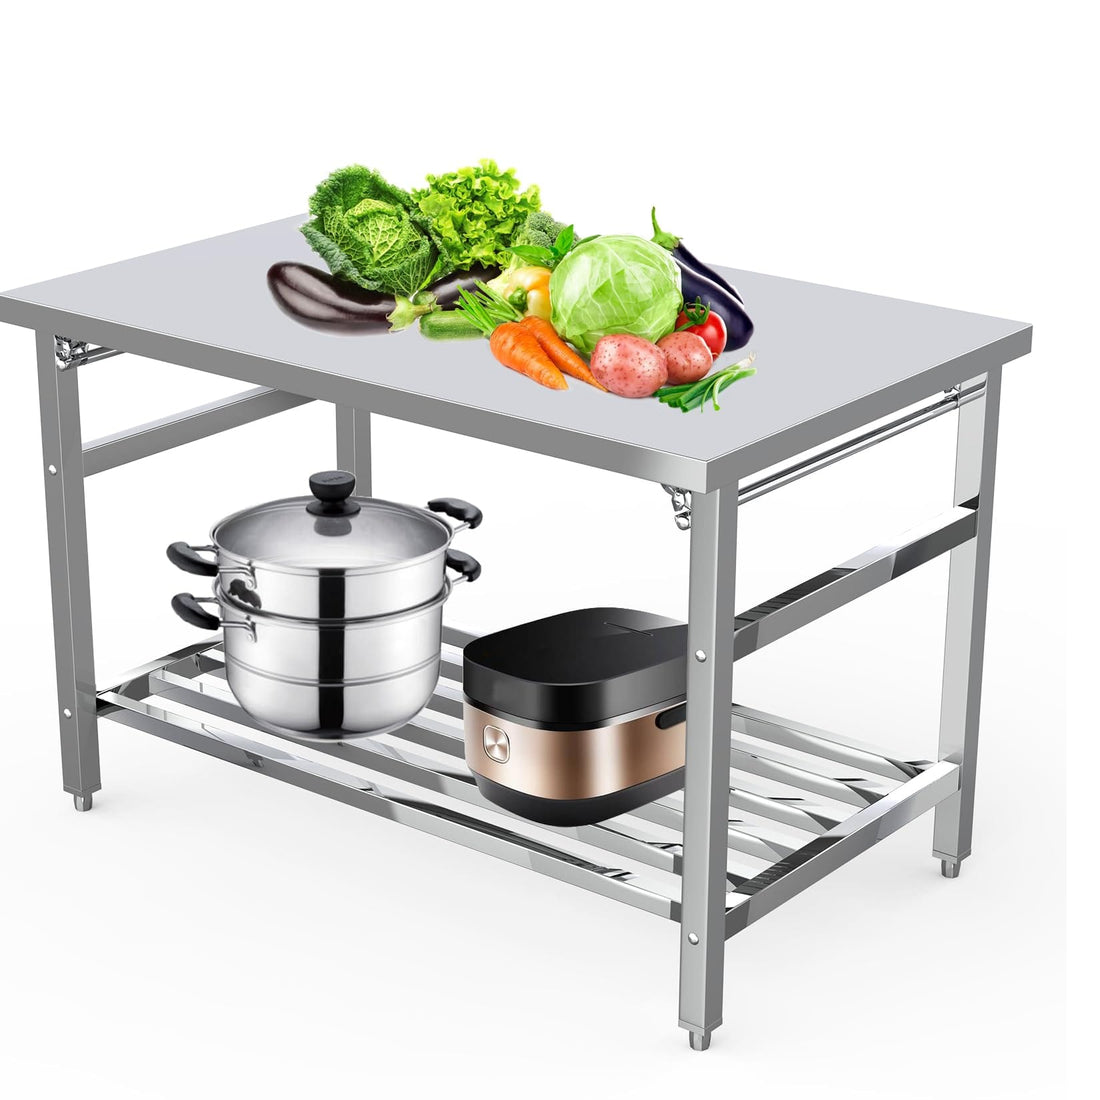 Commercial Stainless Steel Work Table 30x48 Inches with Adjustable Undershelf